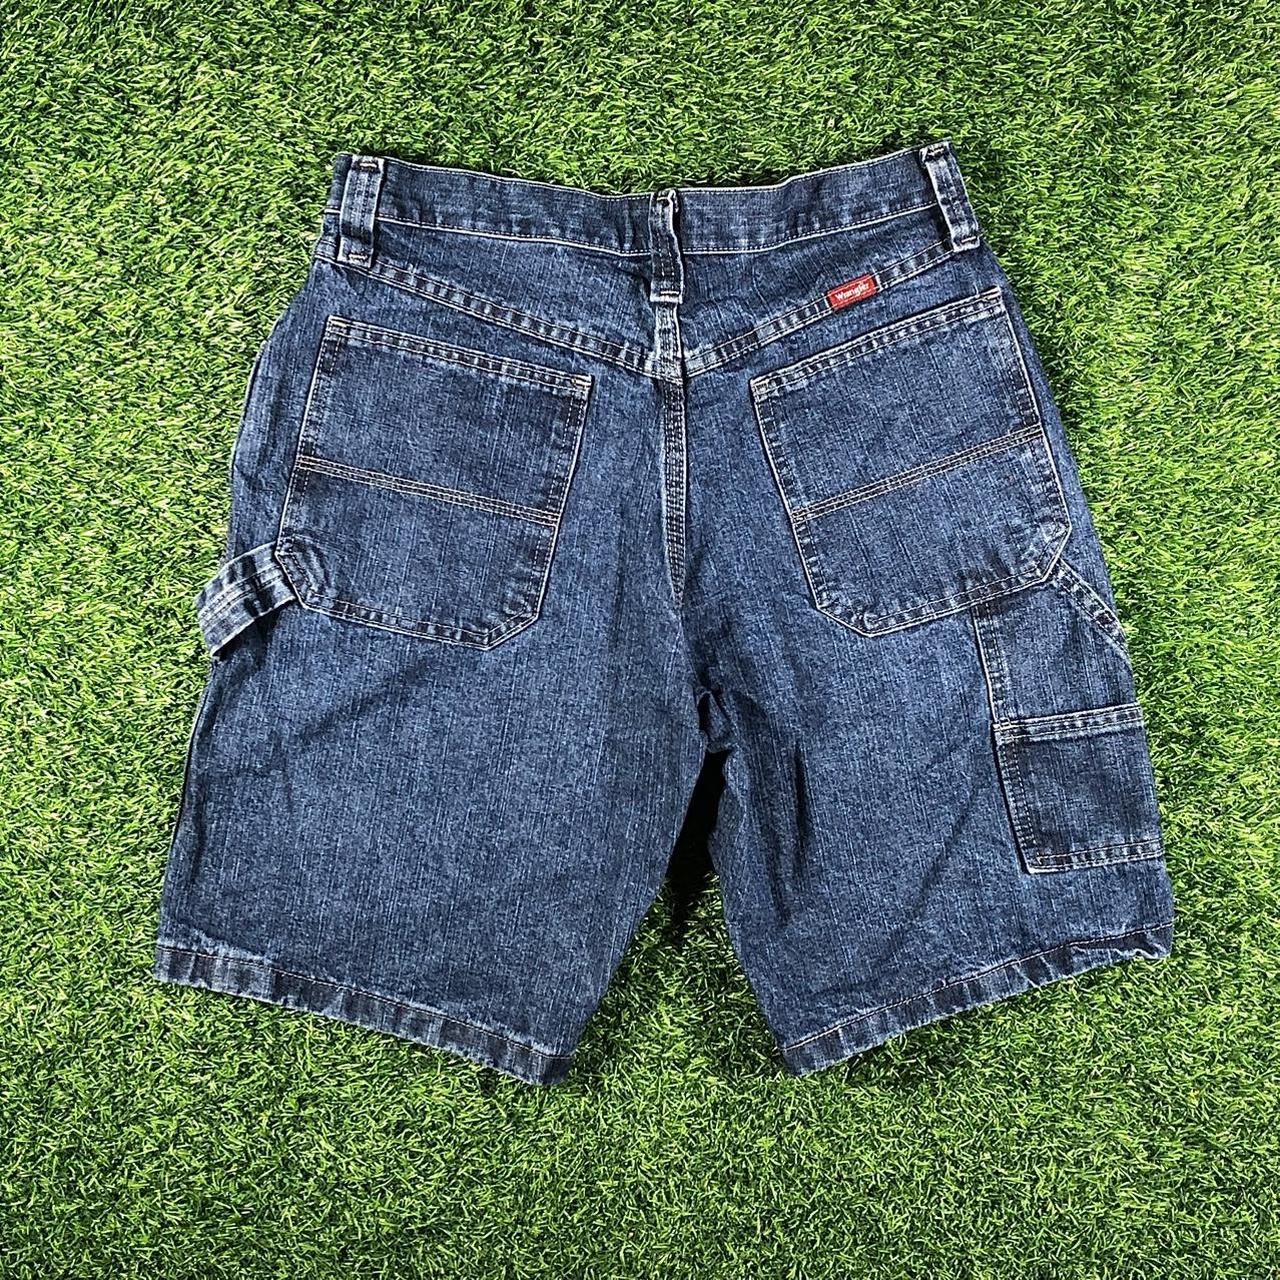 The wrangler cargo shorts you been looking for... - Depop